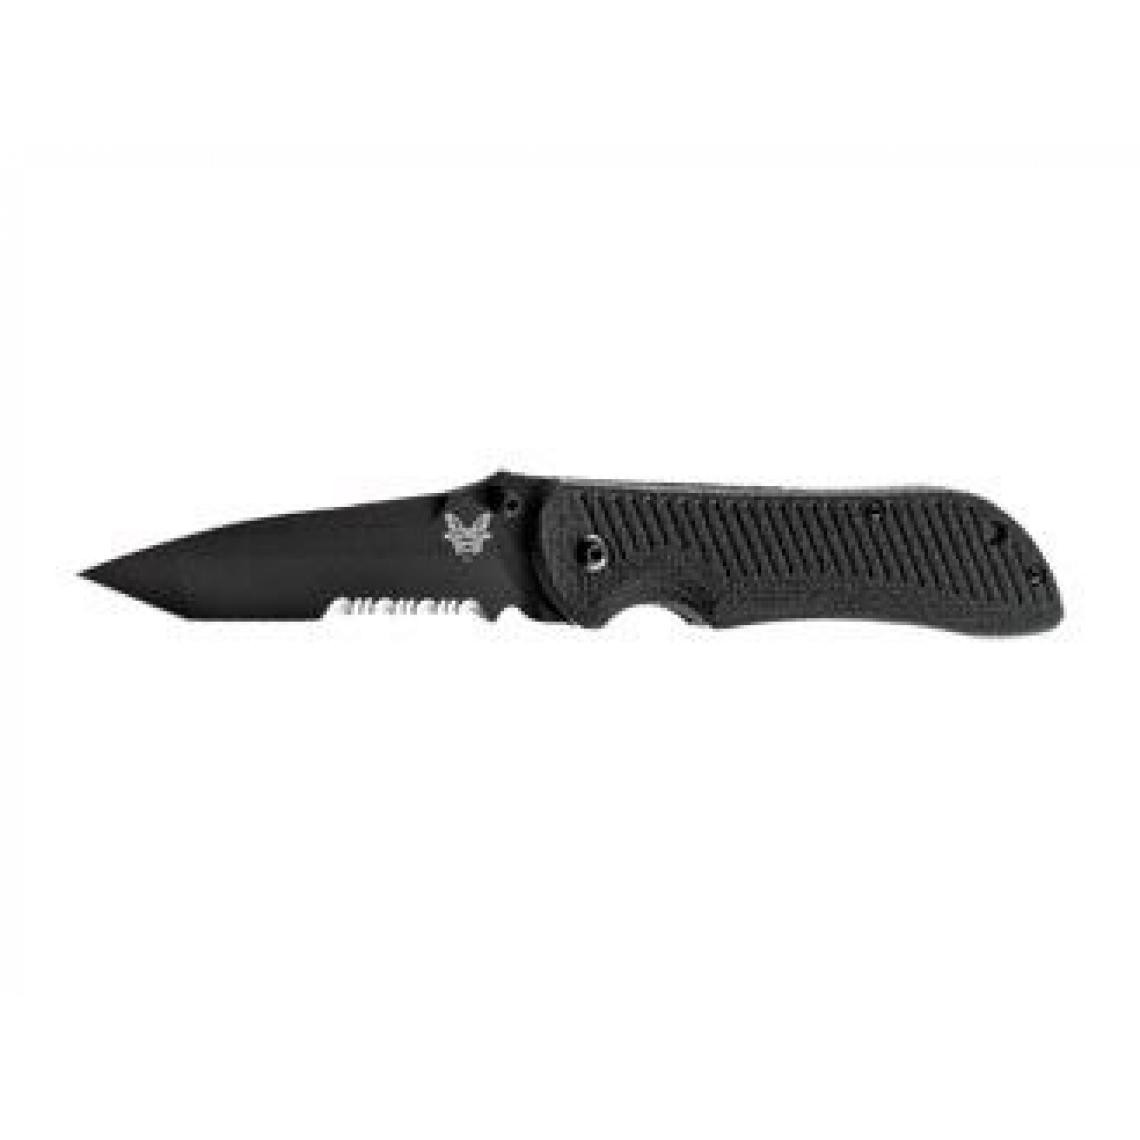 Divers Marques - Benchmade MINI NITROUS STRYKER 906SBKD2 TANTO BLACK COMBO - Outils de coupe